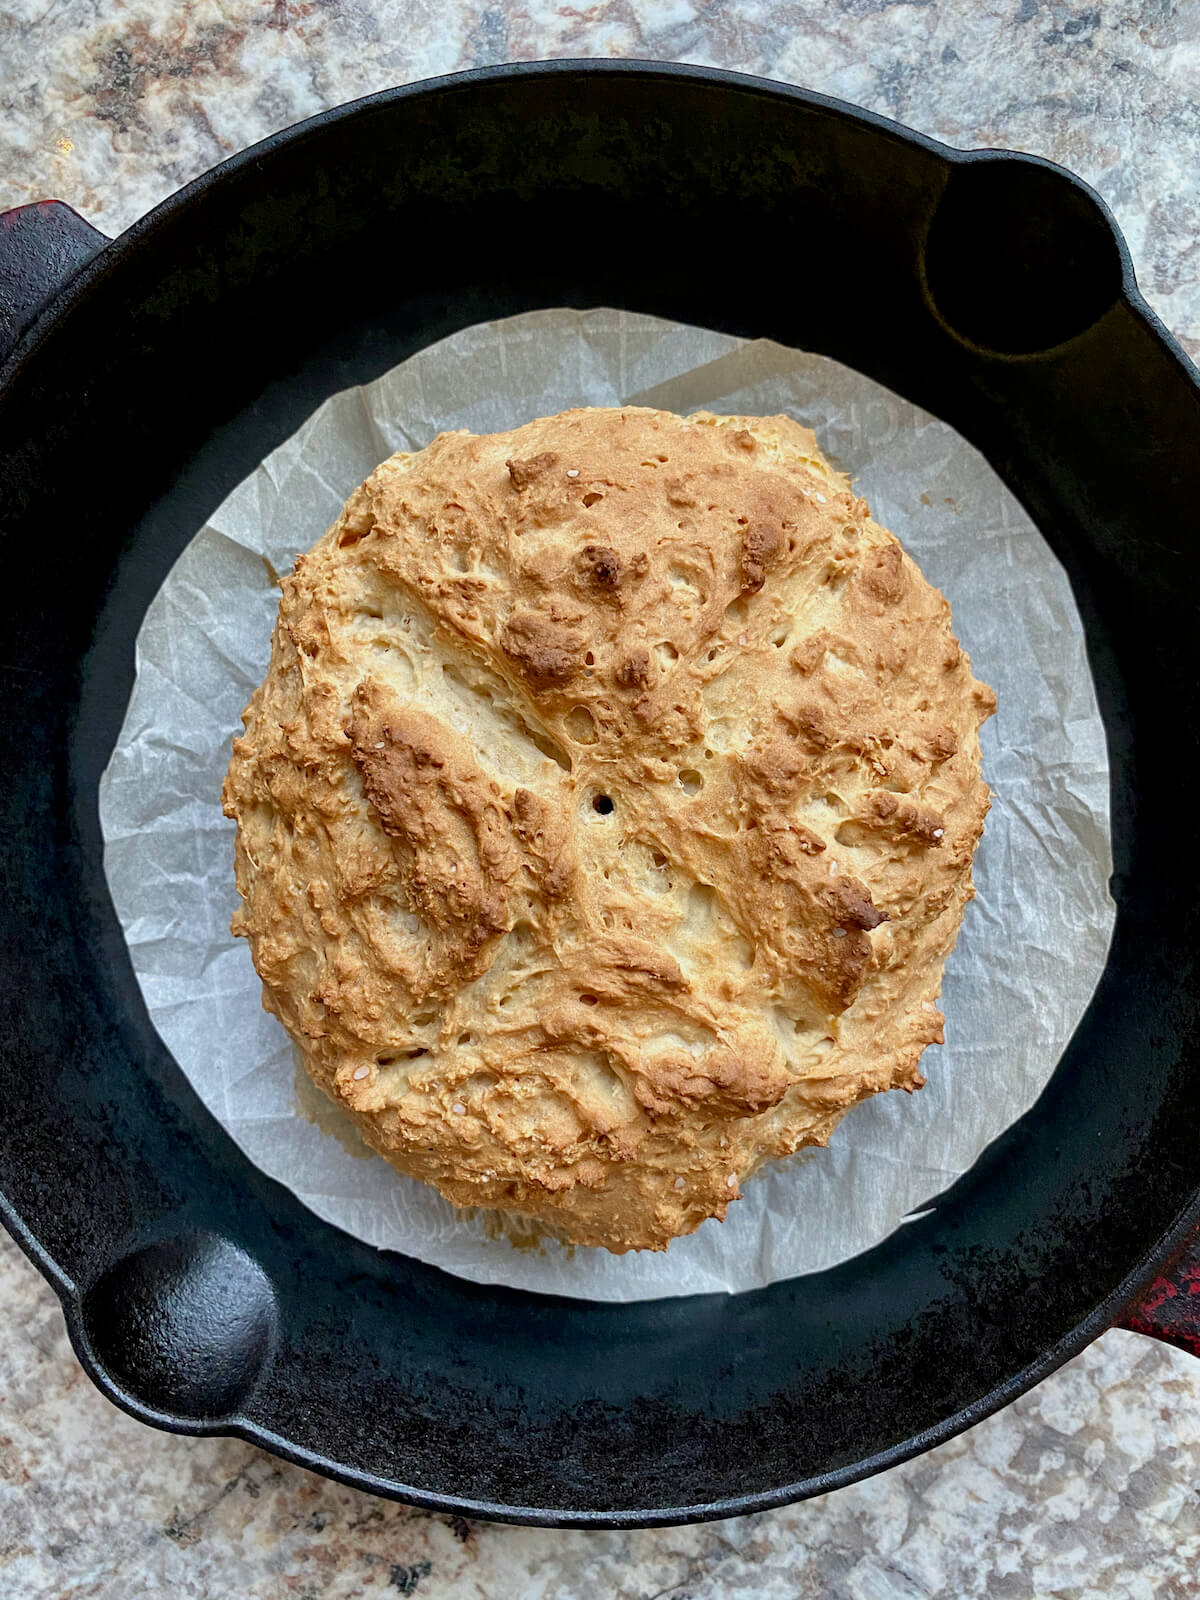 A baked sourdough Irish soda bread loaf in a parchment-lined cast iron skillet.